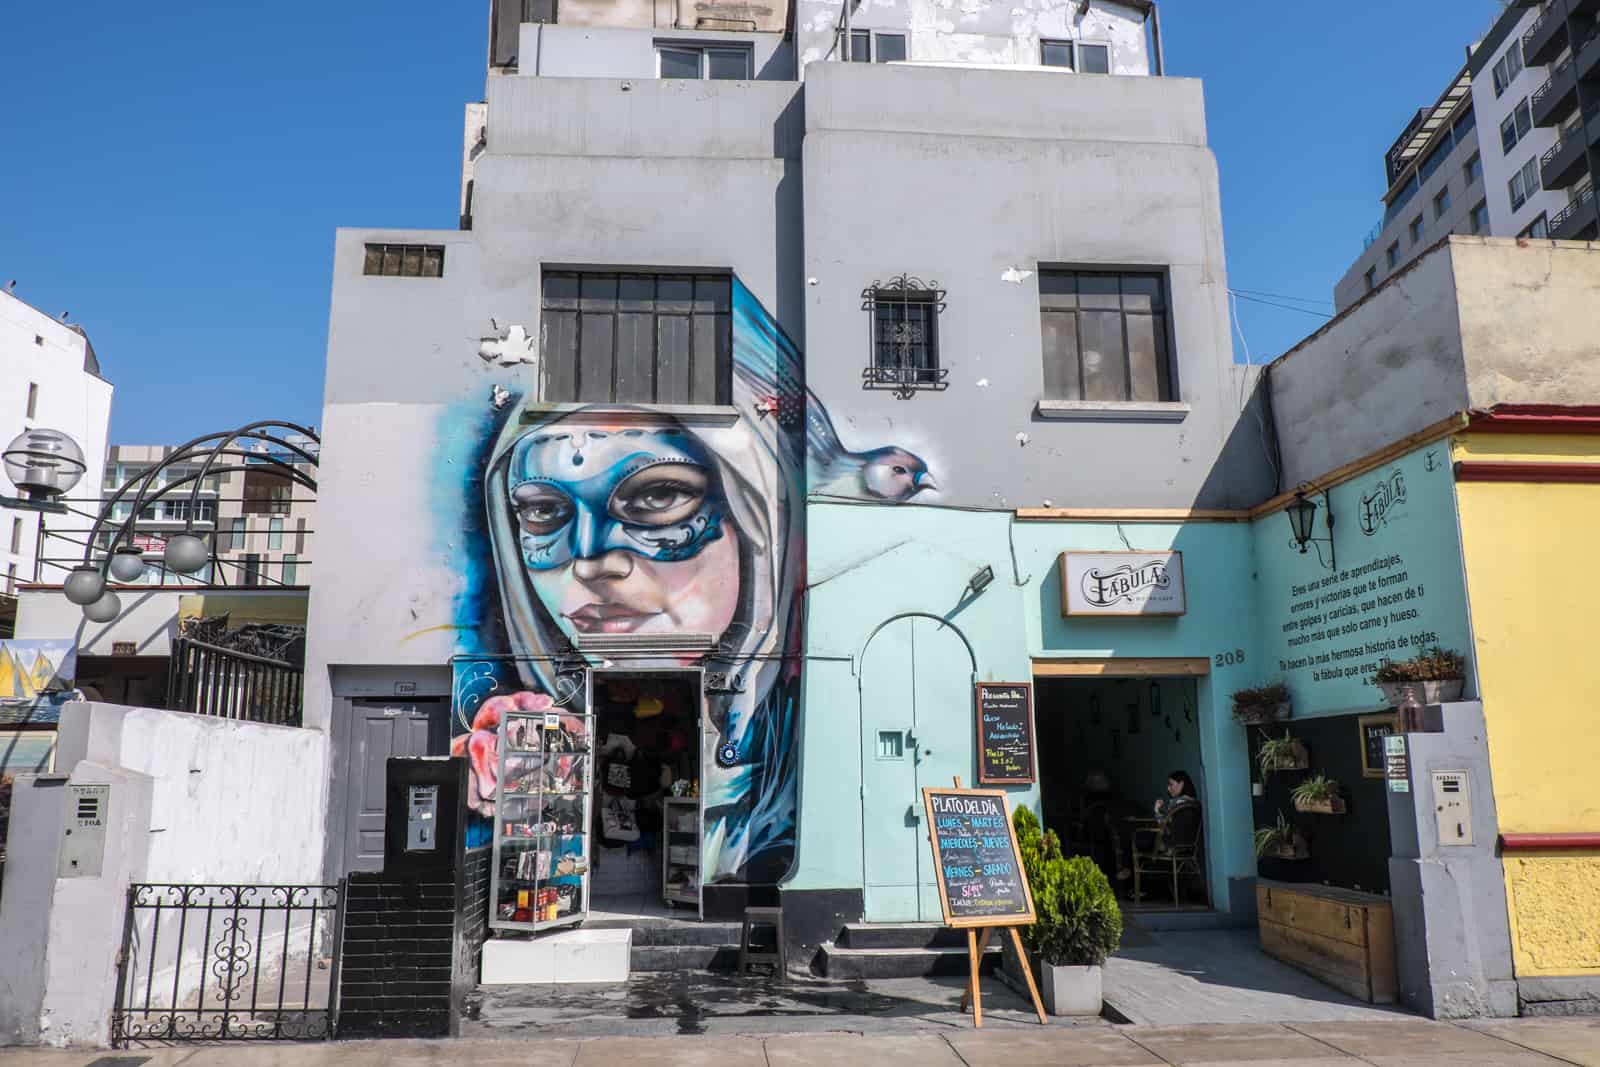 Street art on a small cafe and store building in the Miraflores neighbourhood of Lima.